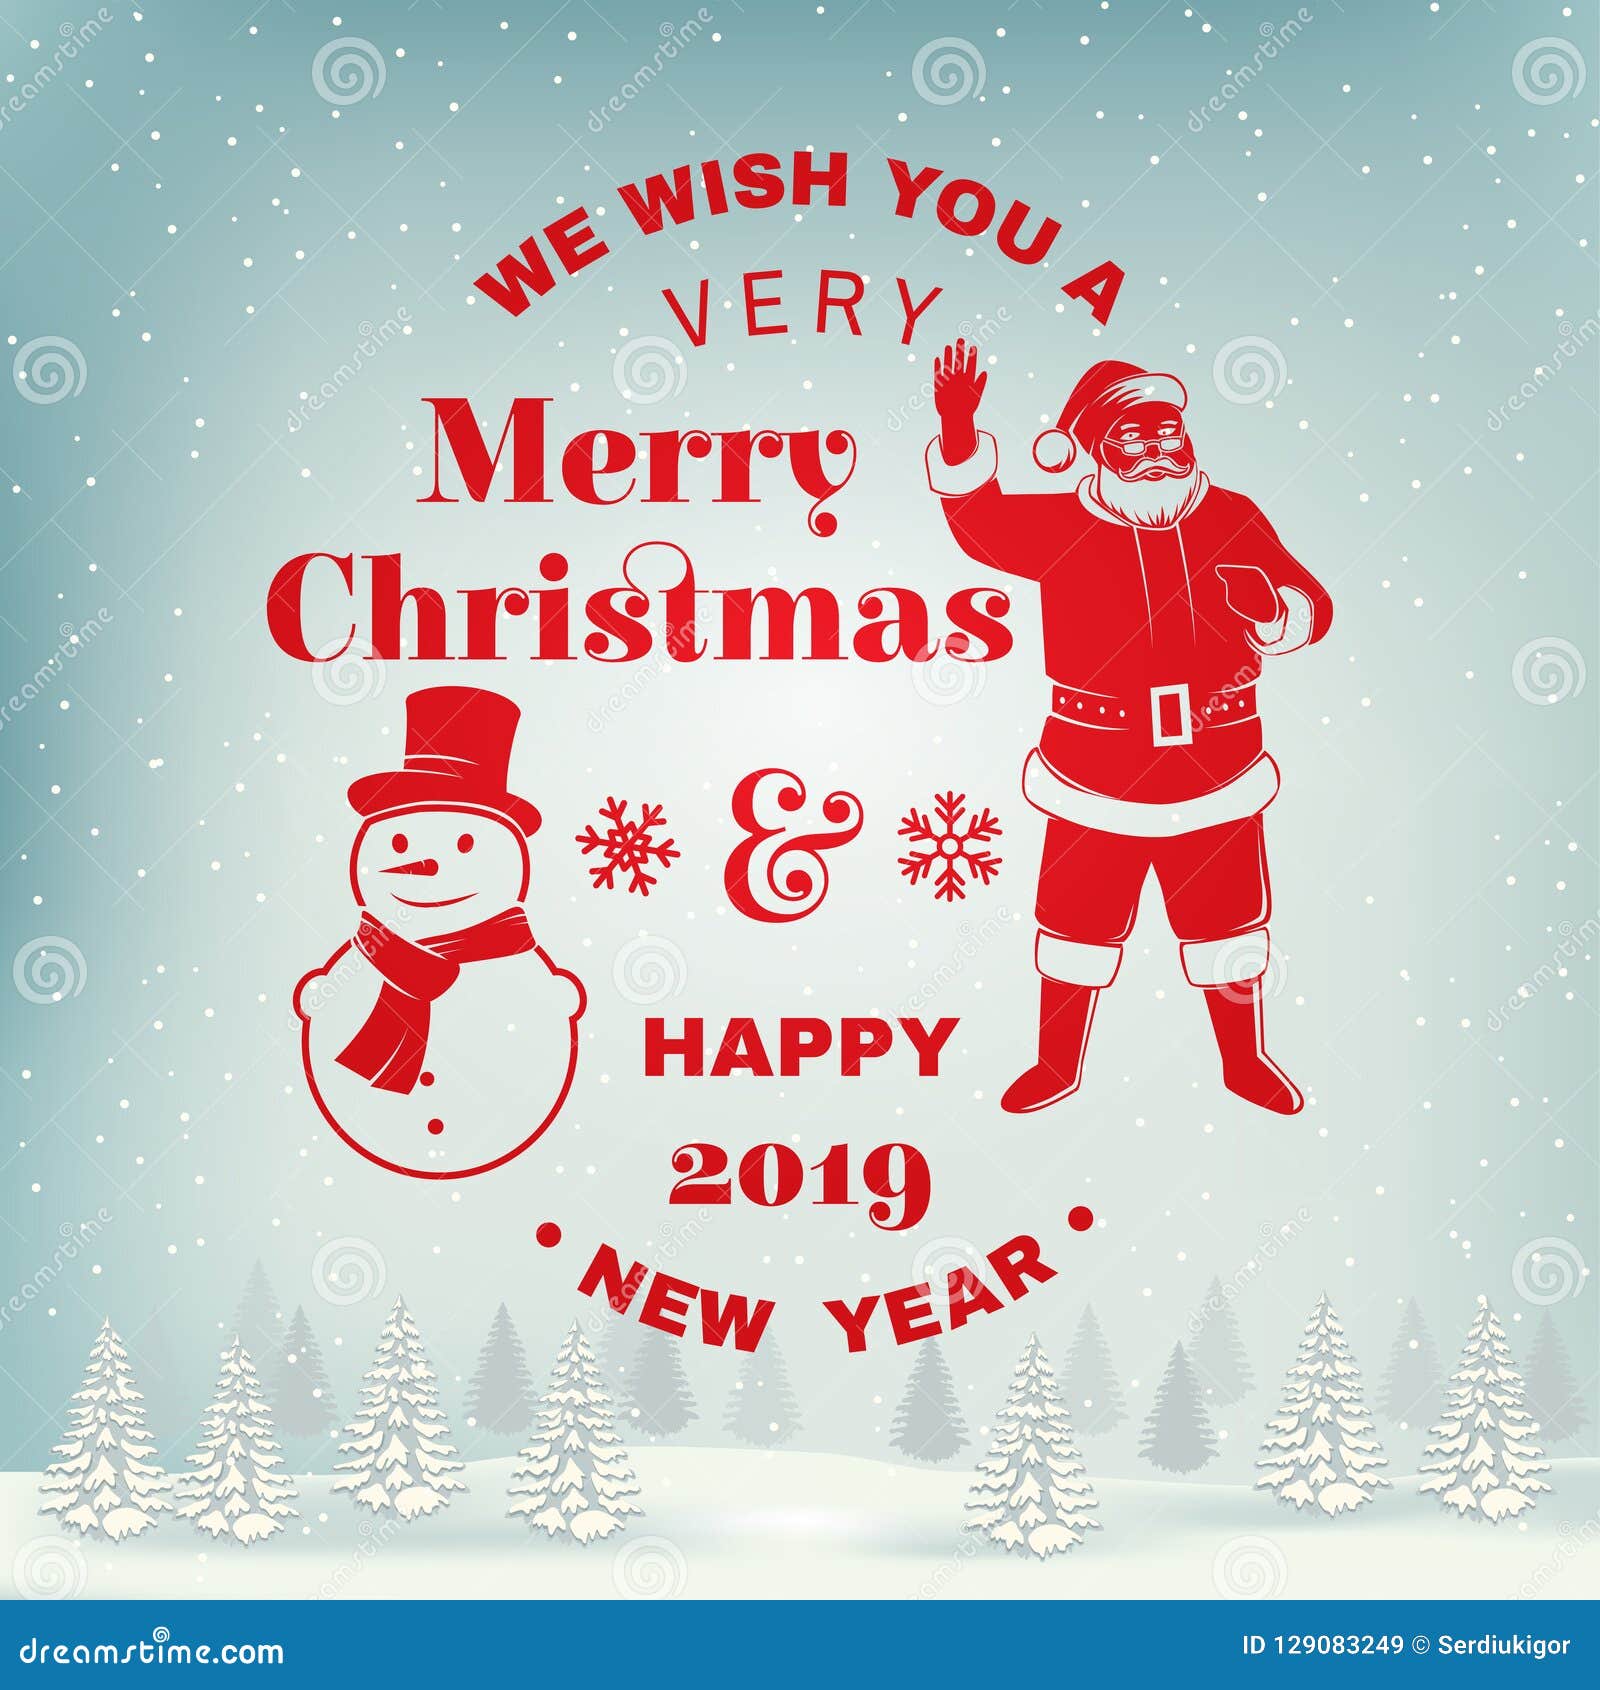 List 104+ Images wish you a very merry christmas and happy new year Excellent